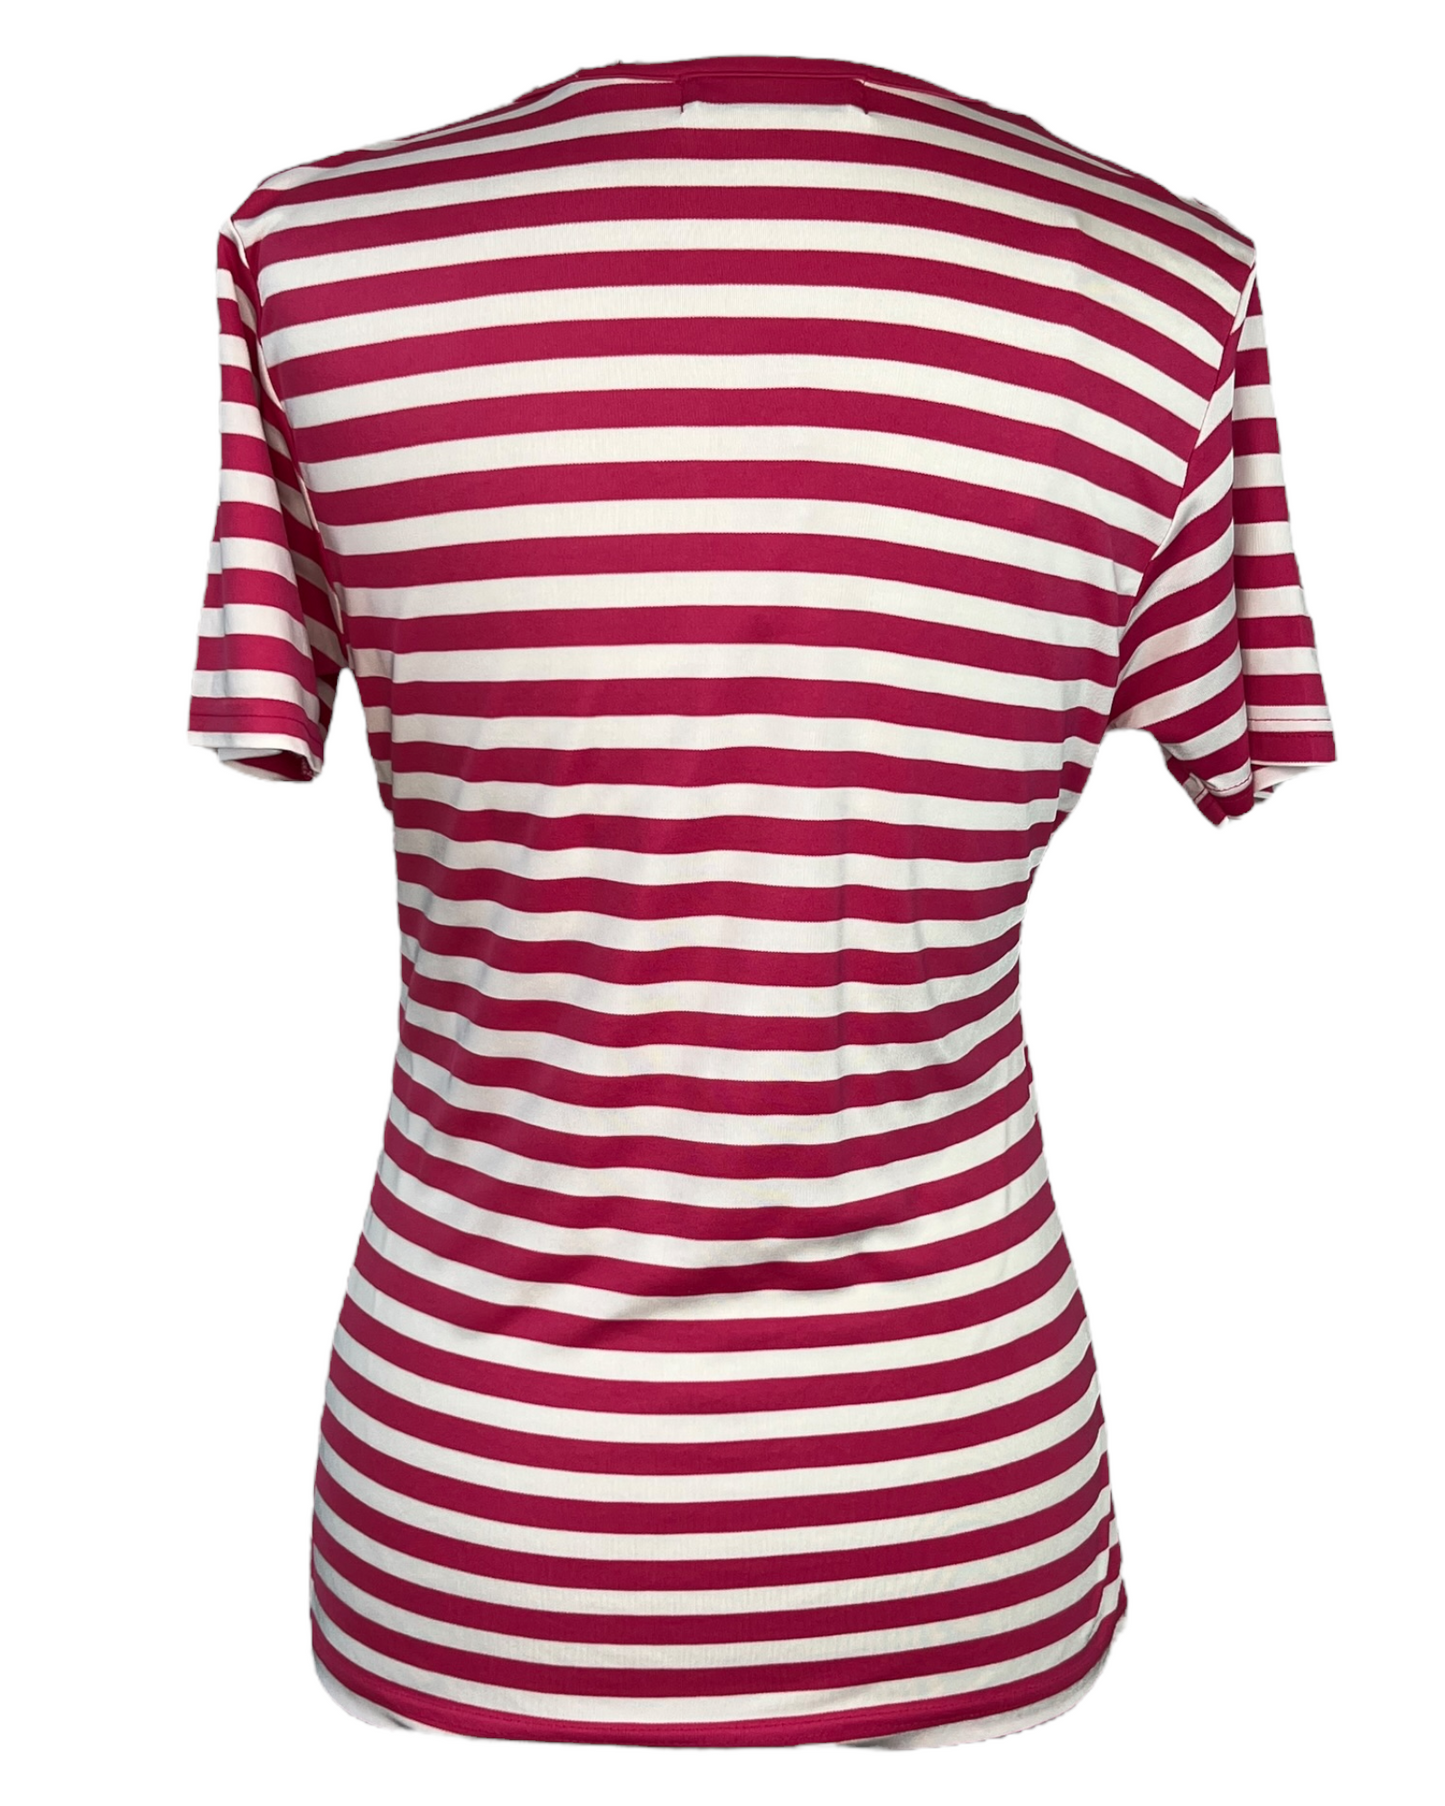 Vintage That's the Last Straw(berry Stripes) Shirt